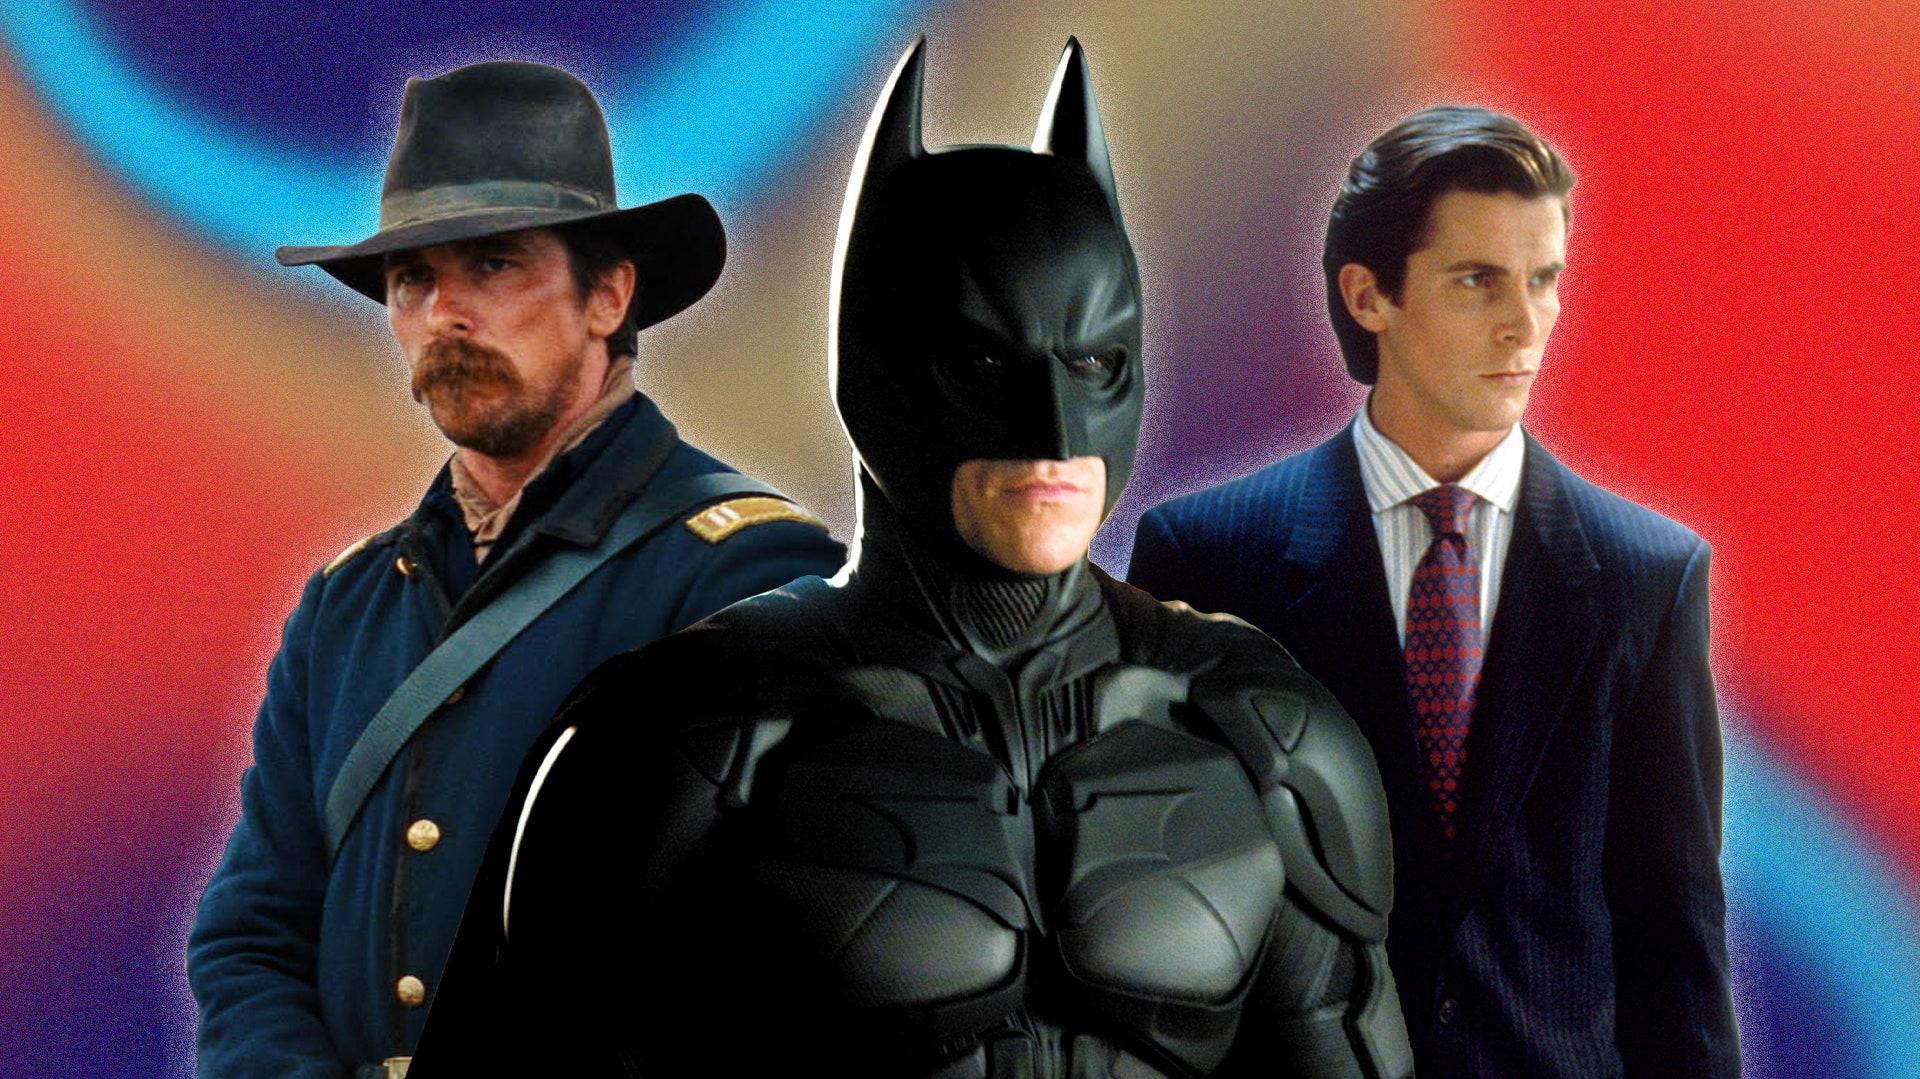 Christian Bale S Best Roles From Batman To American Psycho